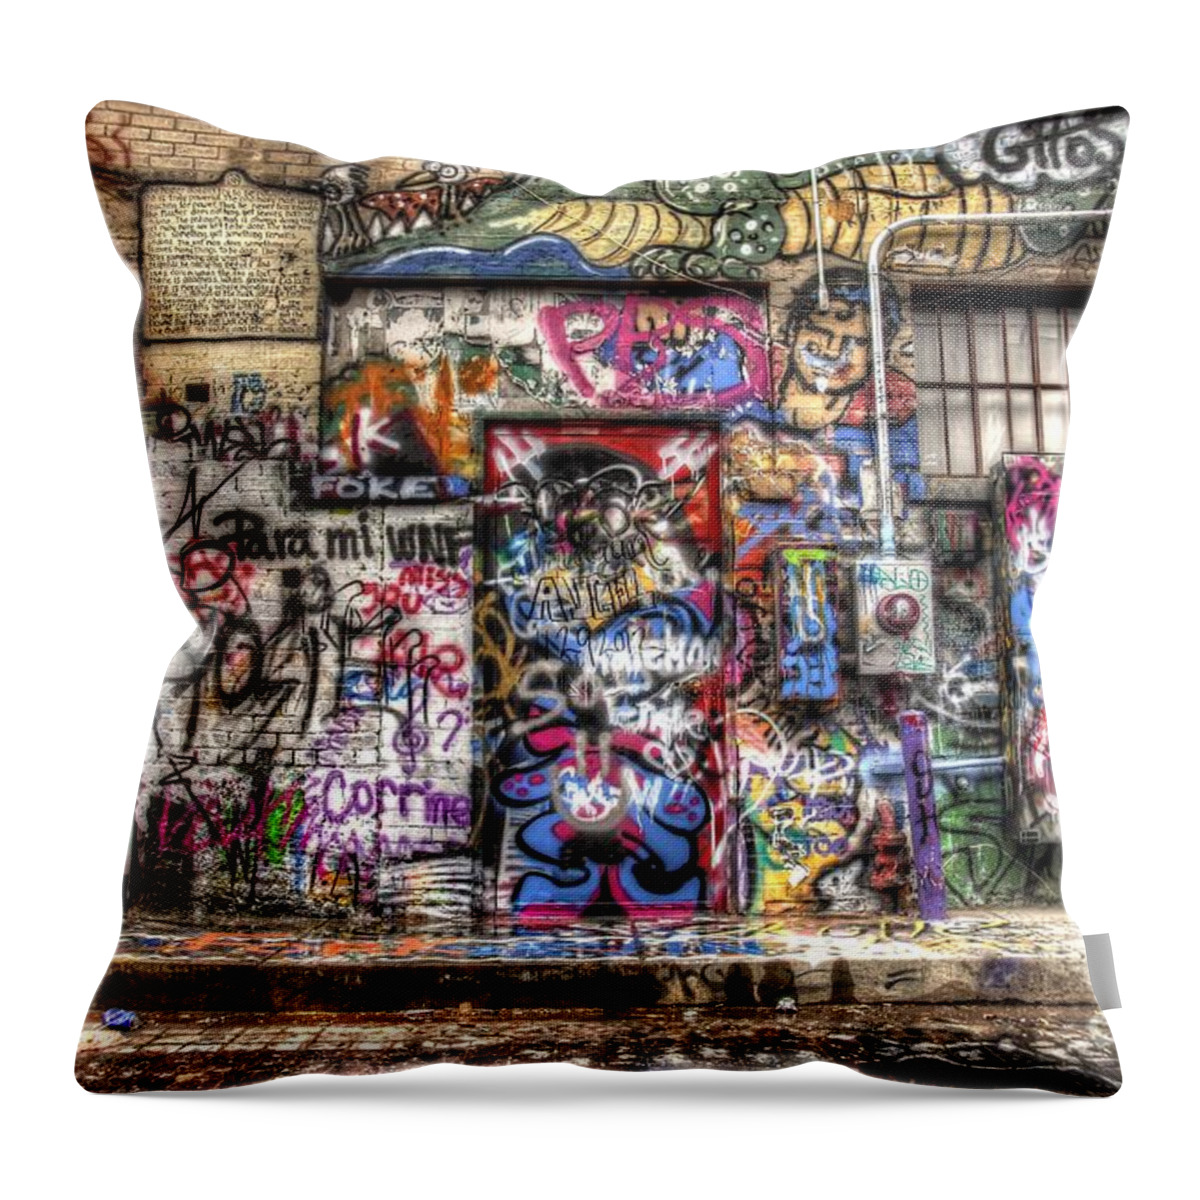 Graffiti Throw Pillow featuring the photograph Street Life by Anthony Wilkening